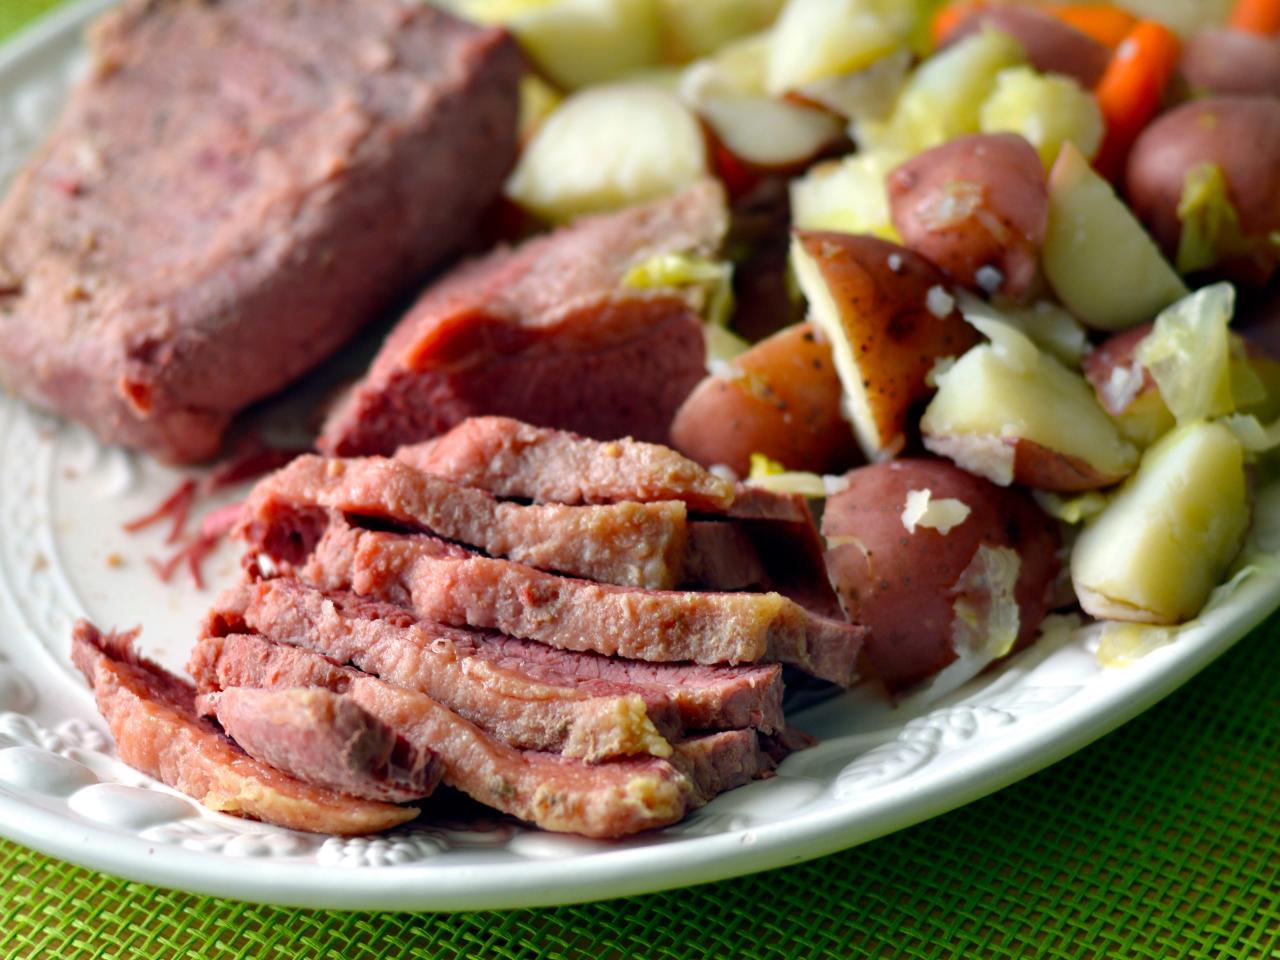 What Is Corned Beef? And How To Cook Corned Beef